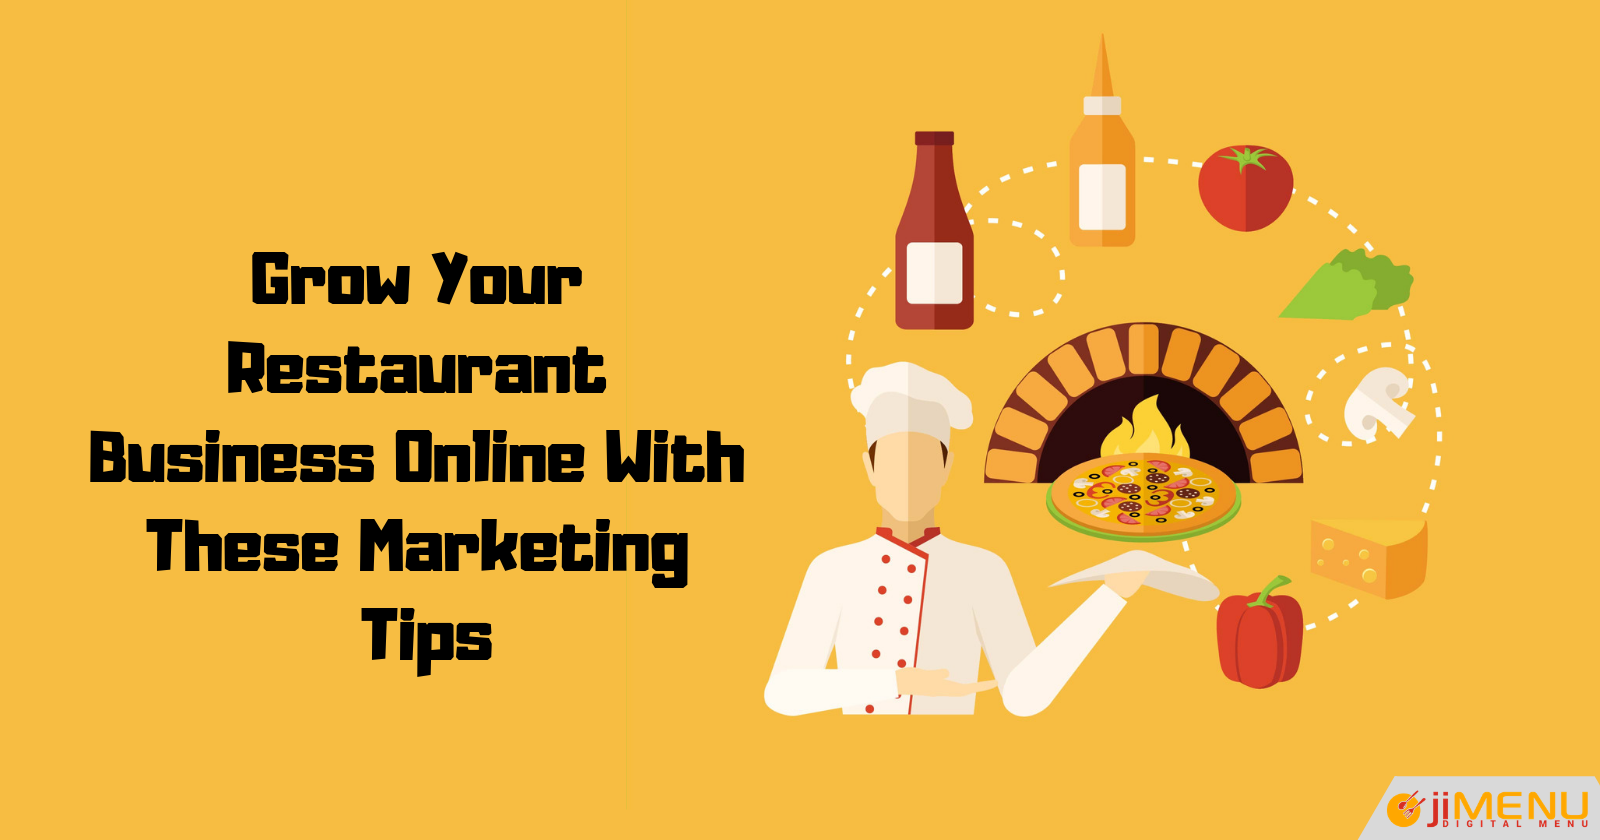 Marketing Tips for Growing Your Restaurant Business Online